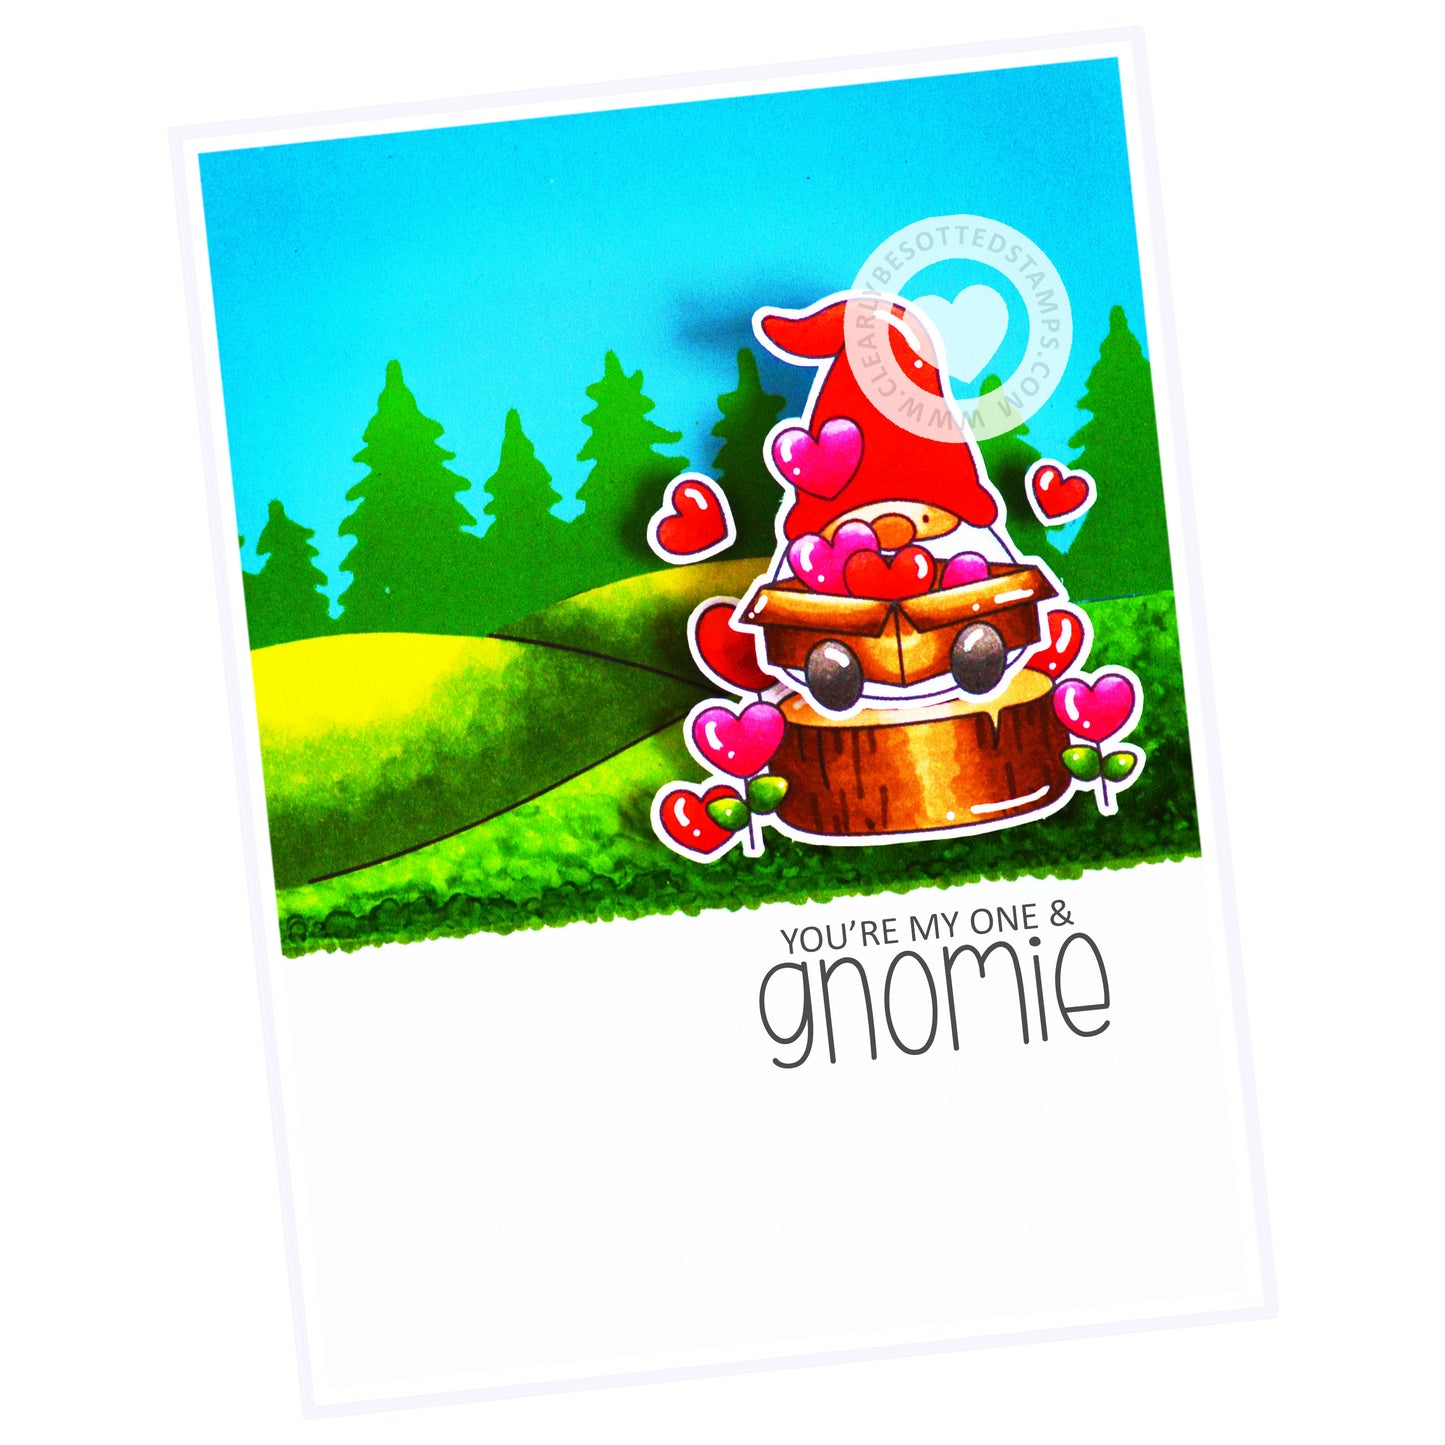 Love Like Gnome Other